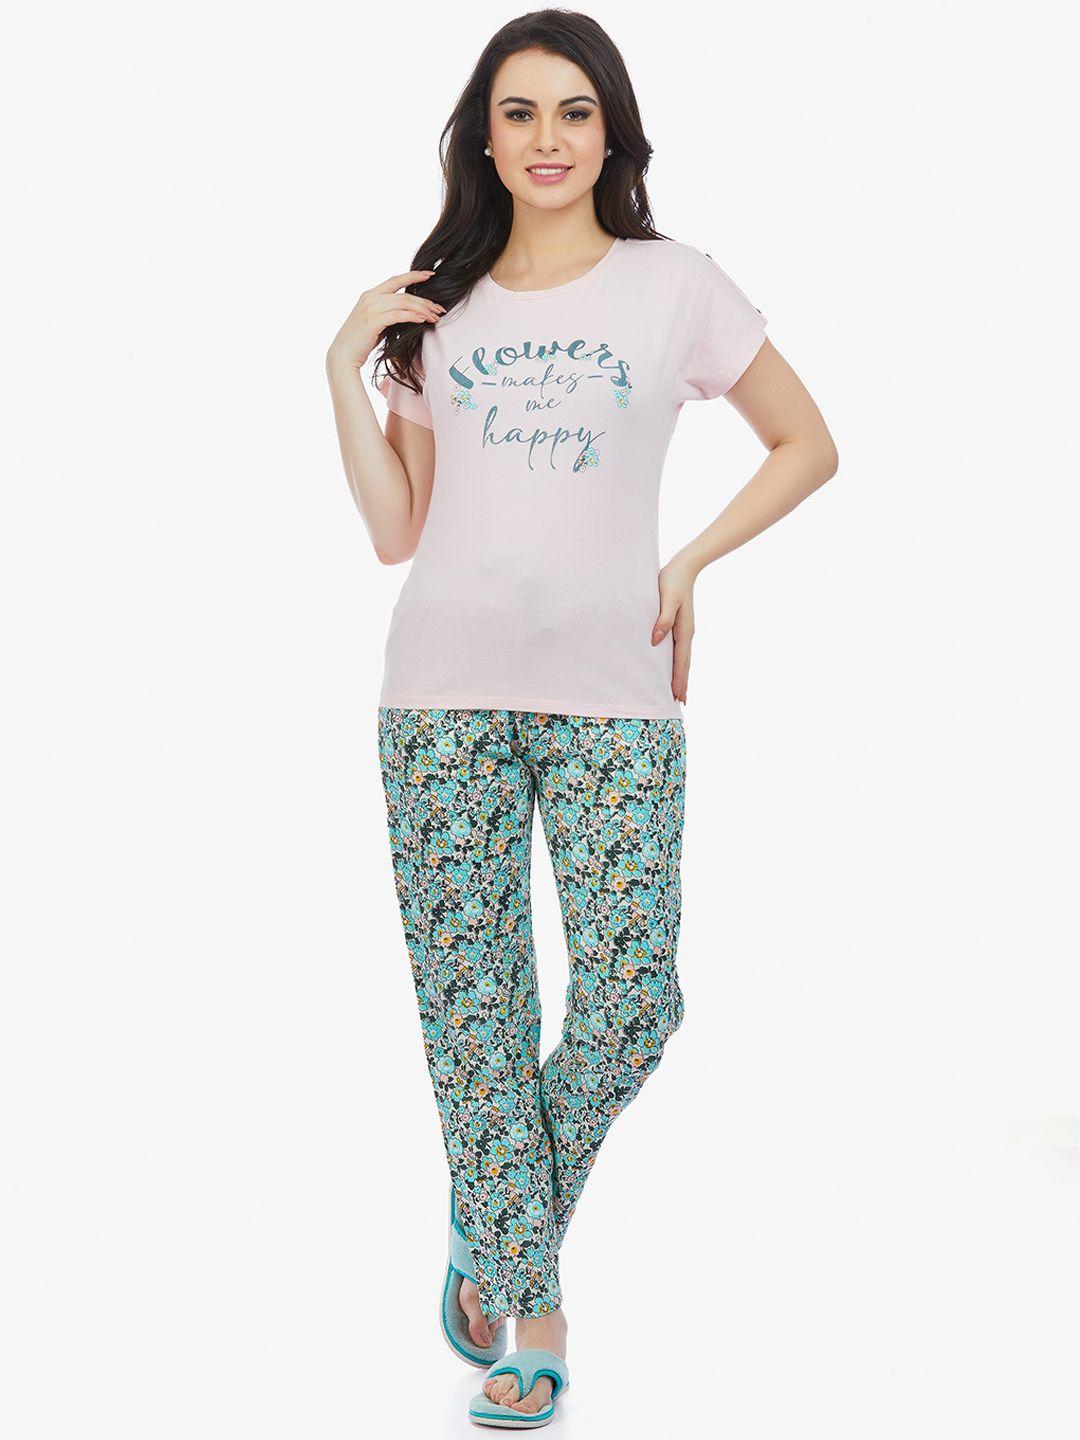 maysixty-floral-printed-night-suit